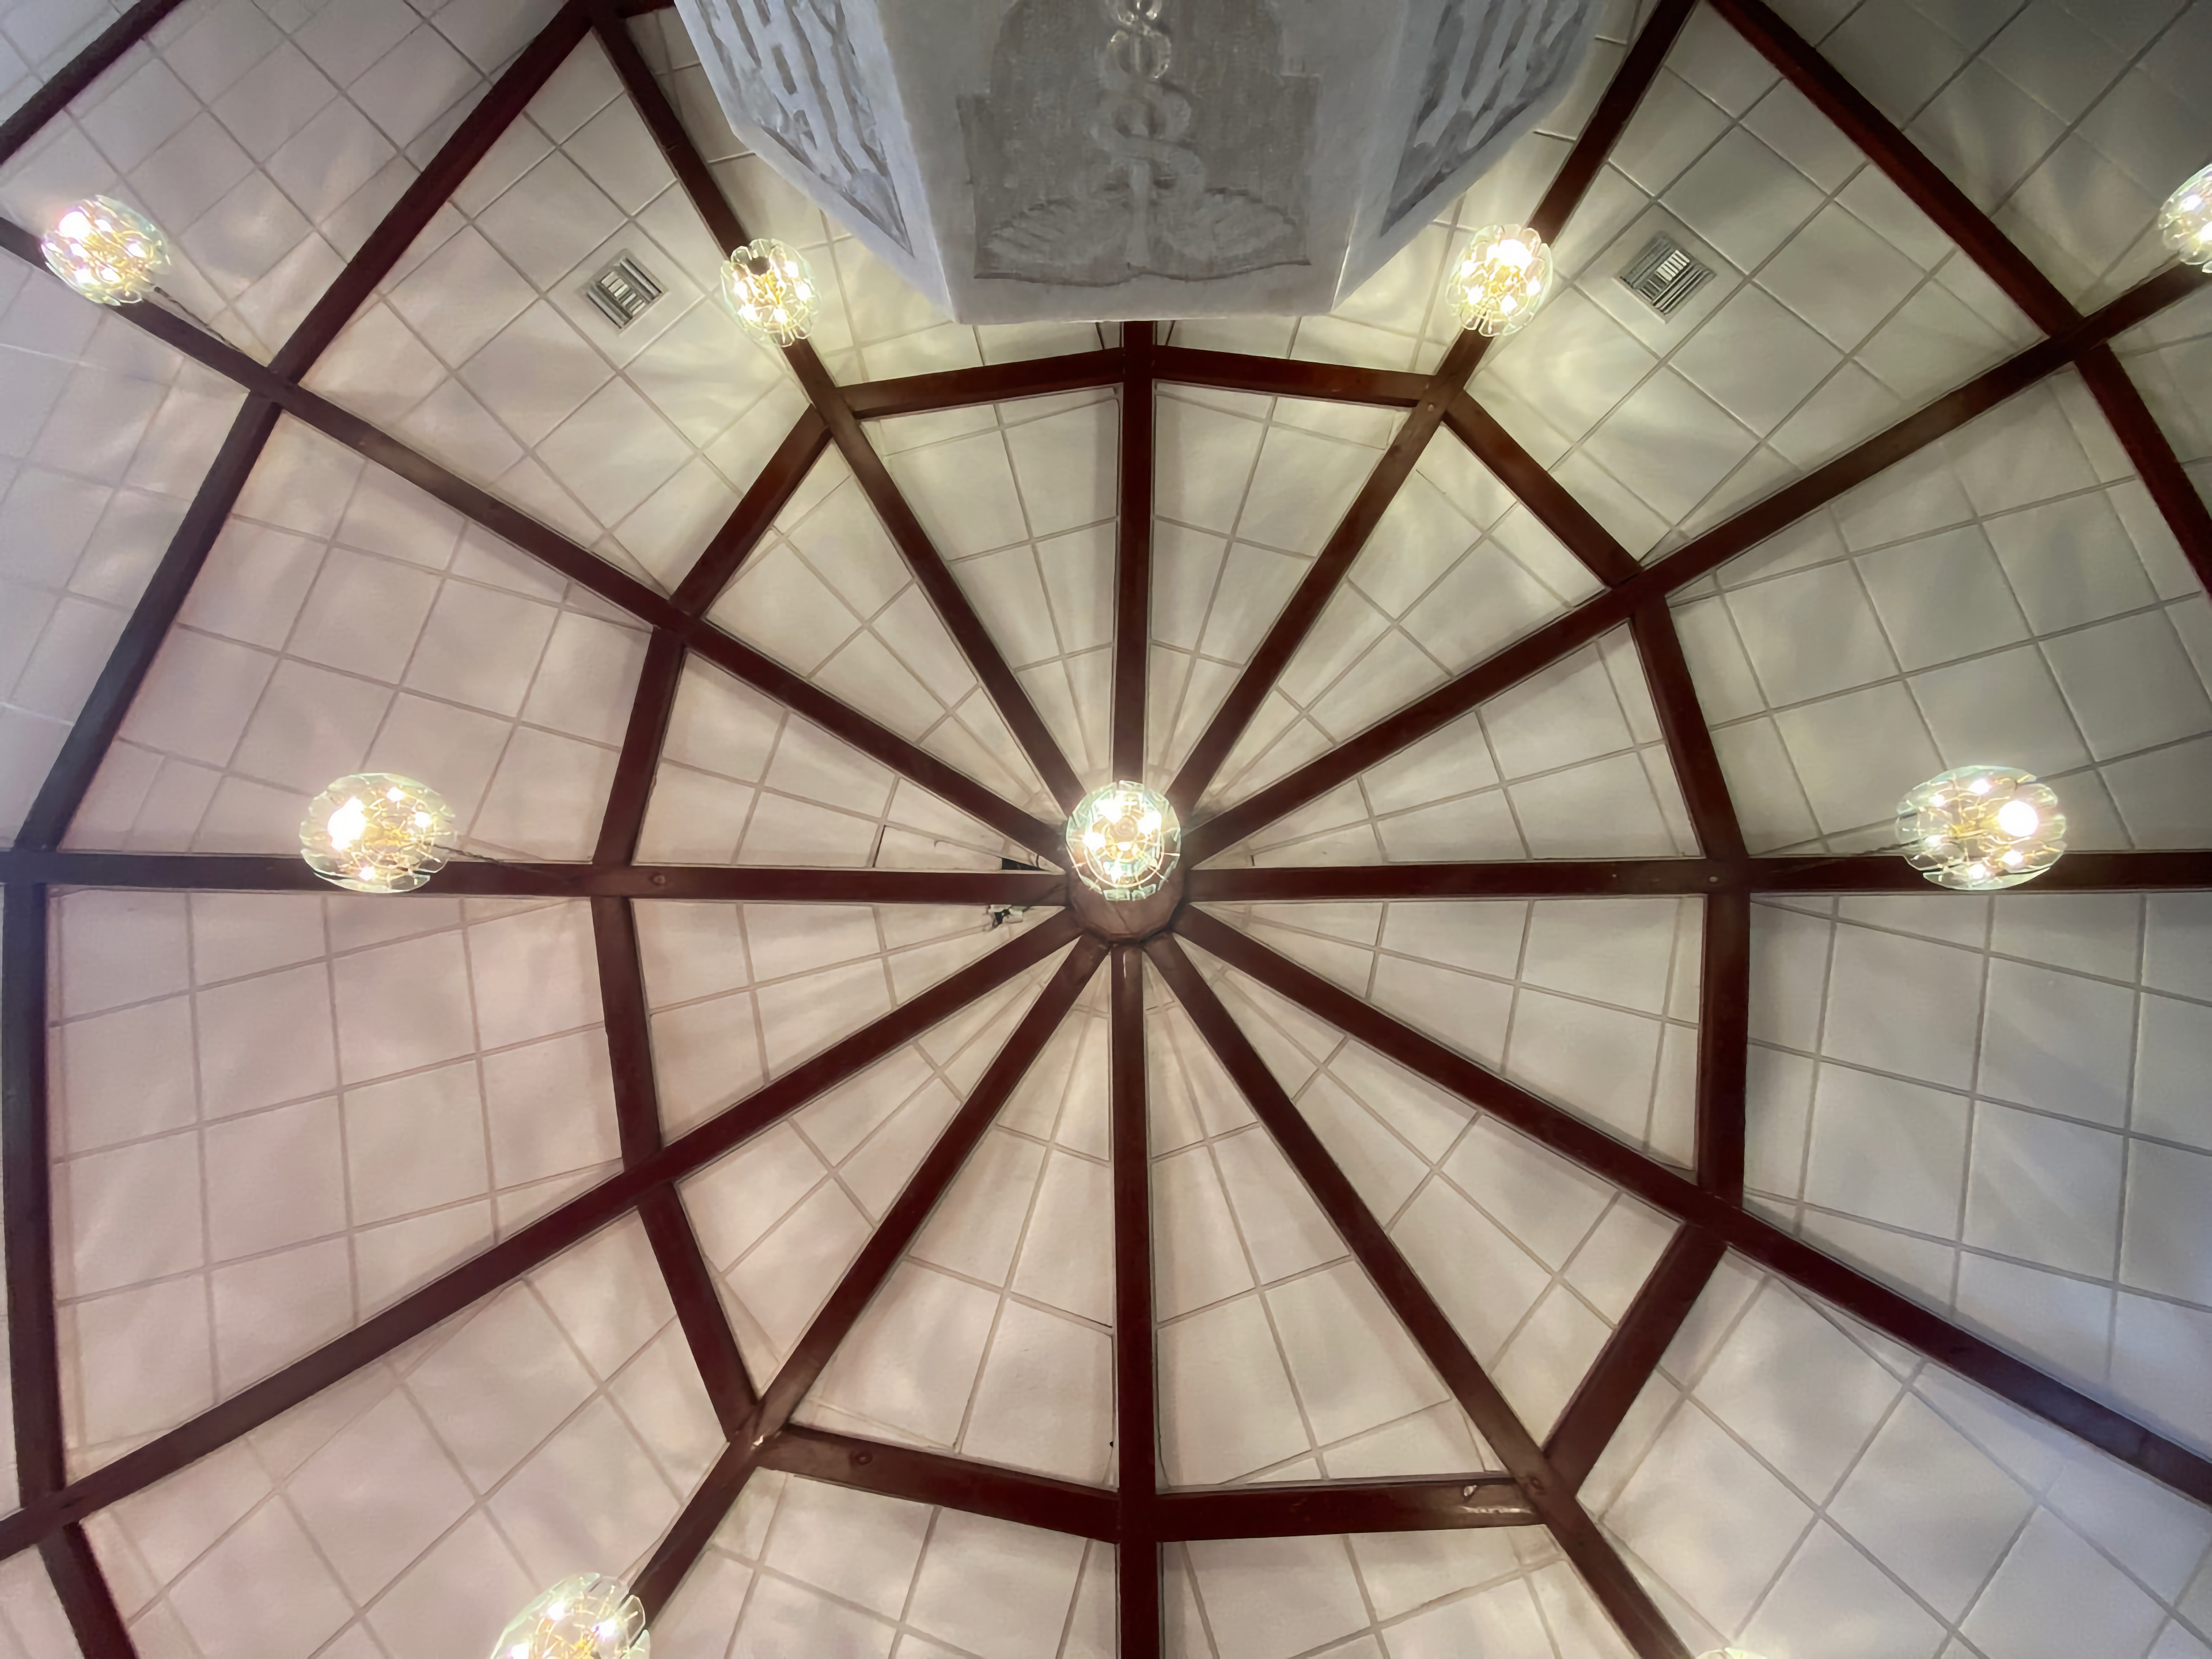 The ceiling of the St. Paul AME Church in St. Augustine. All white with dark wood beams in the shape of wheel spokes.